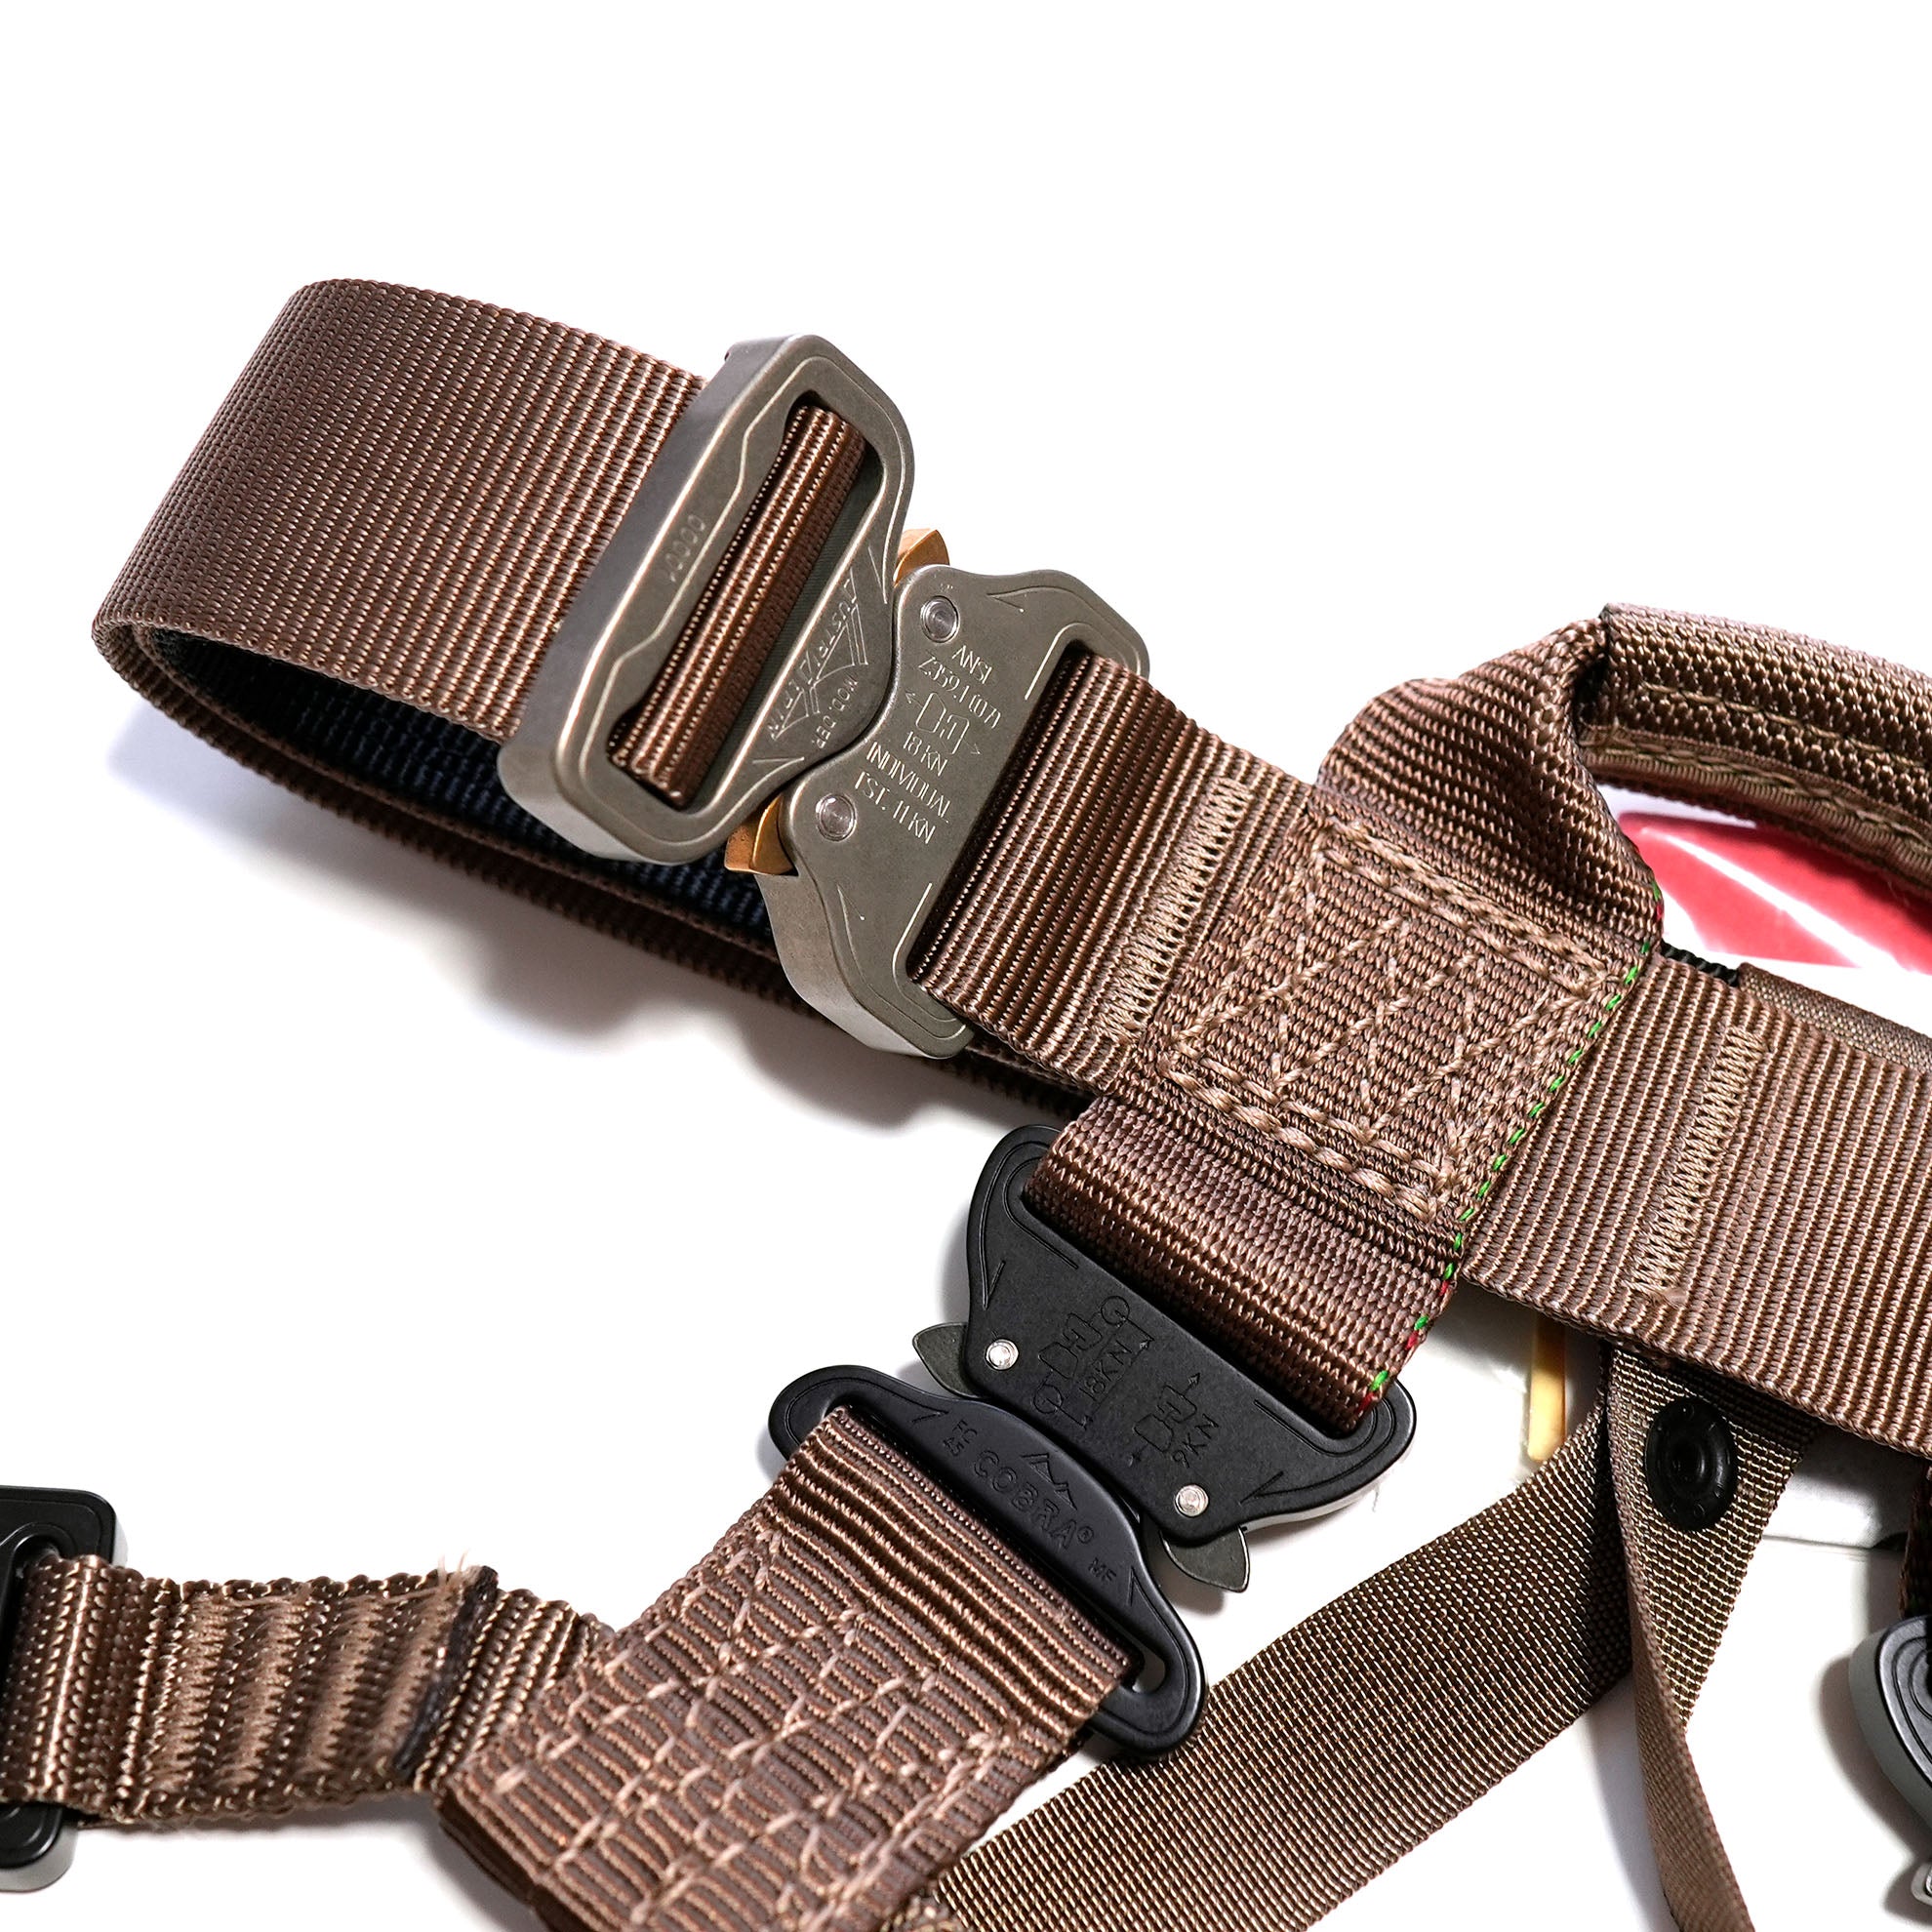 Yates Special Forces Rappel Belt with Cobra Buckle Waist and Legs